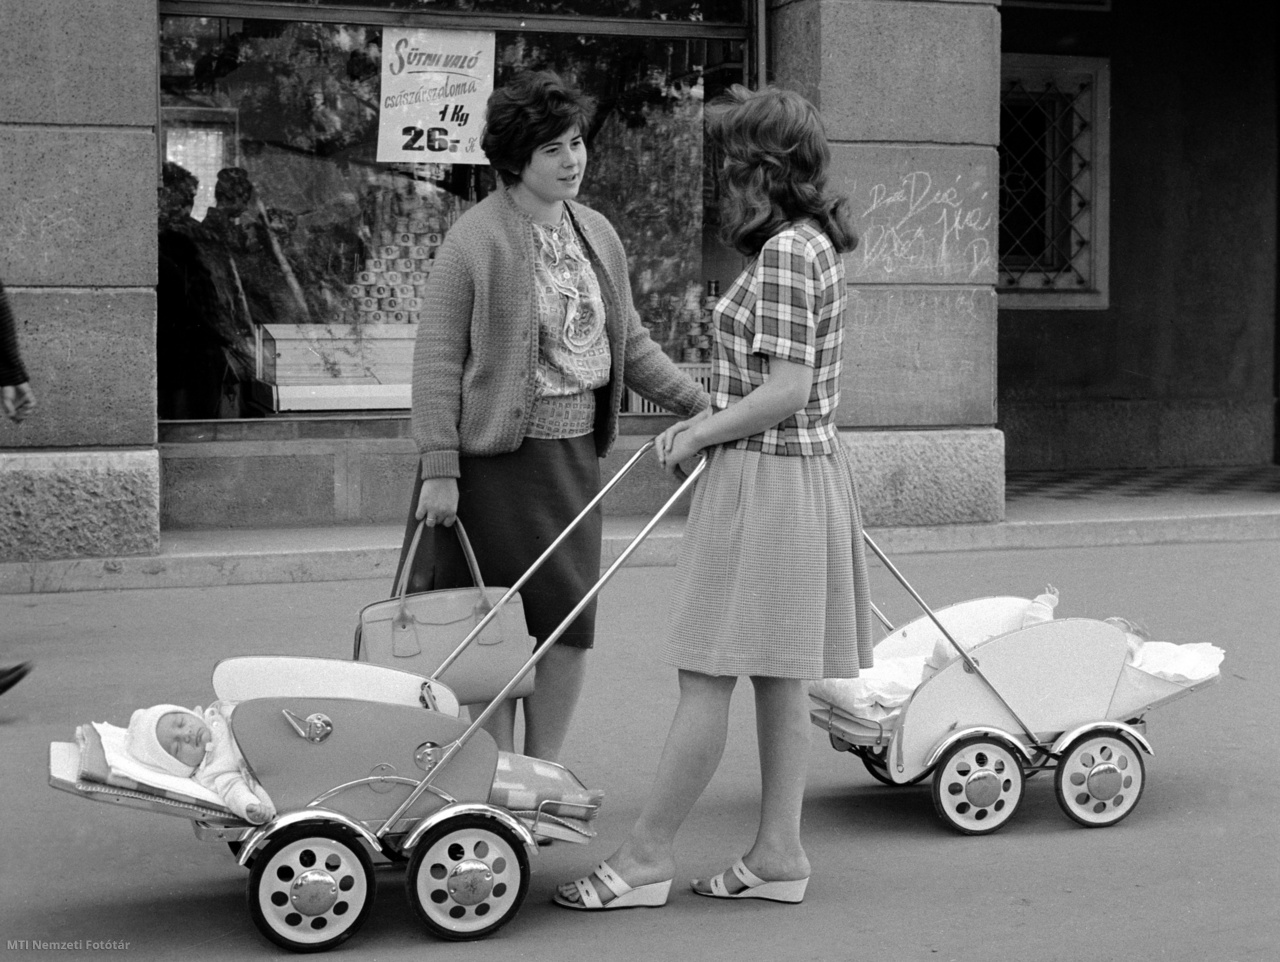 Dunaújváros, June 2, 1965. Young mothers speak in front of a grocery store in Dunaújvaros